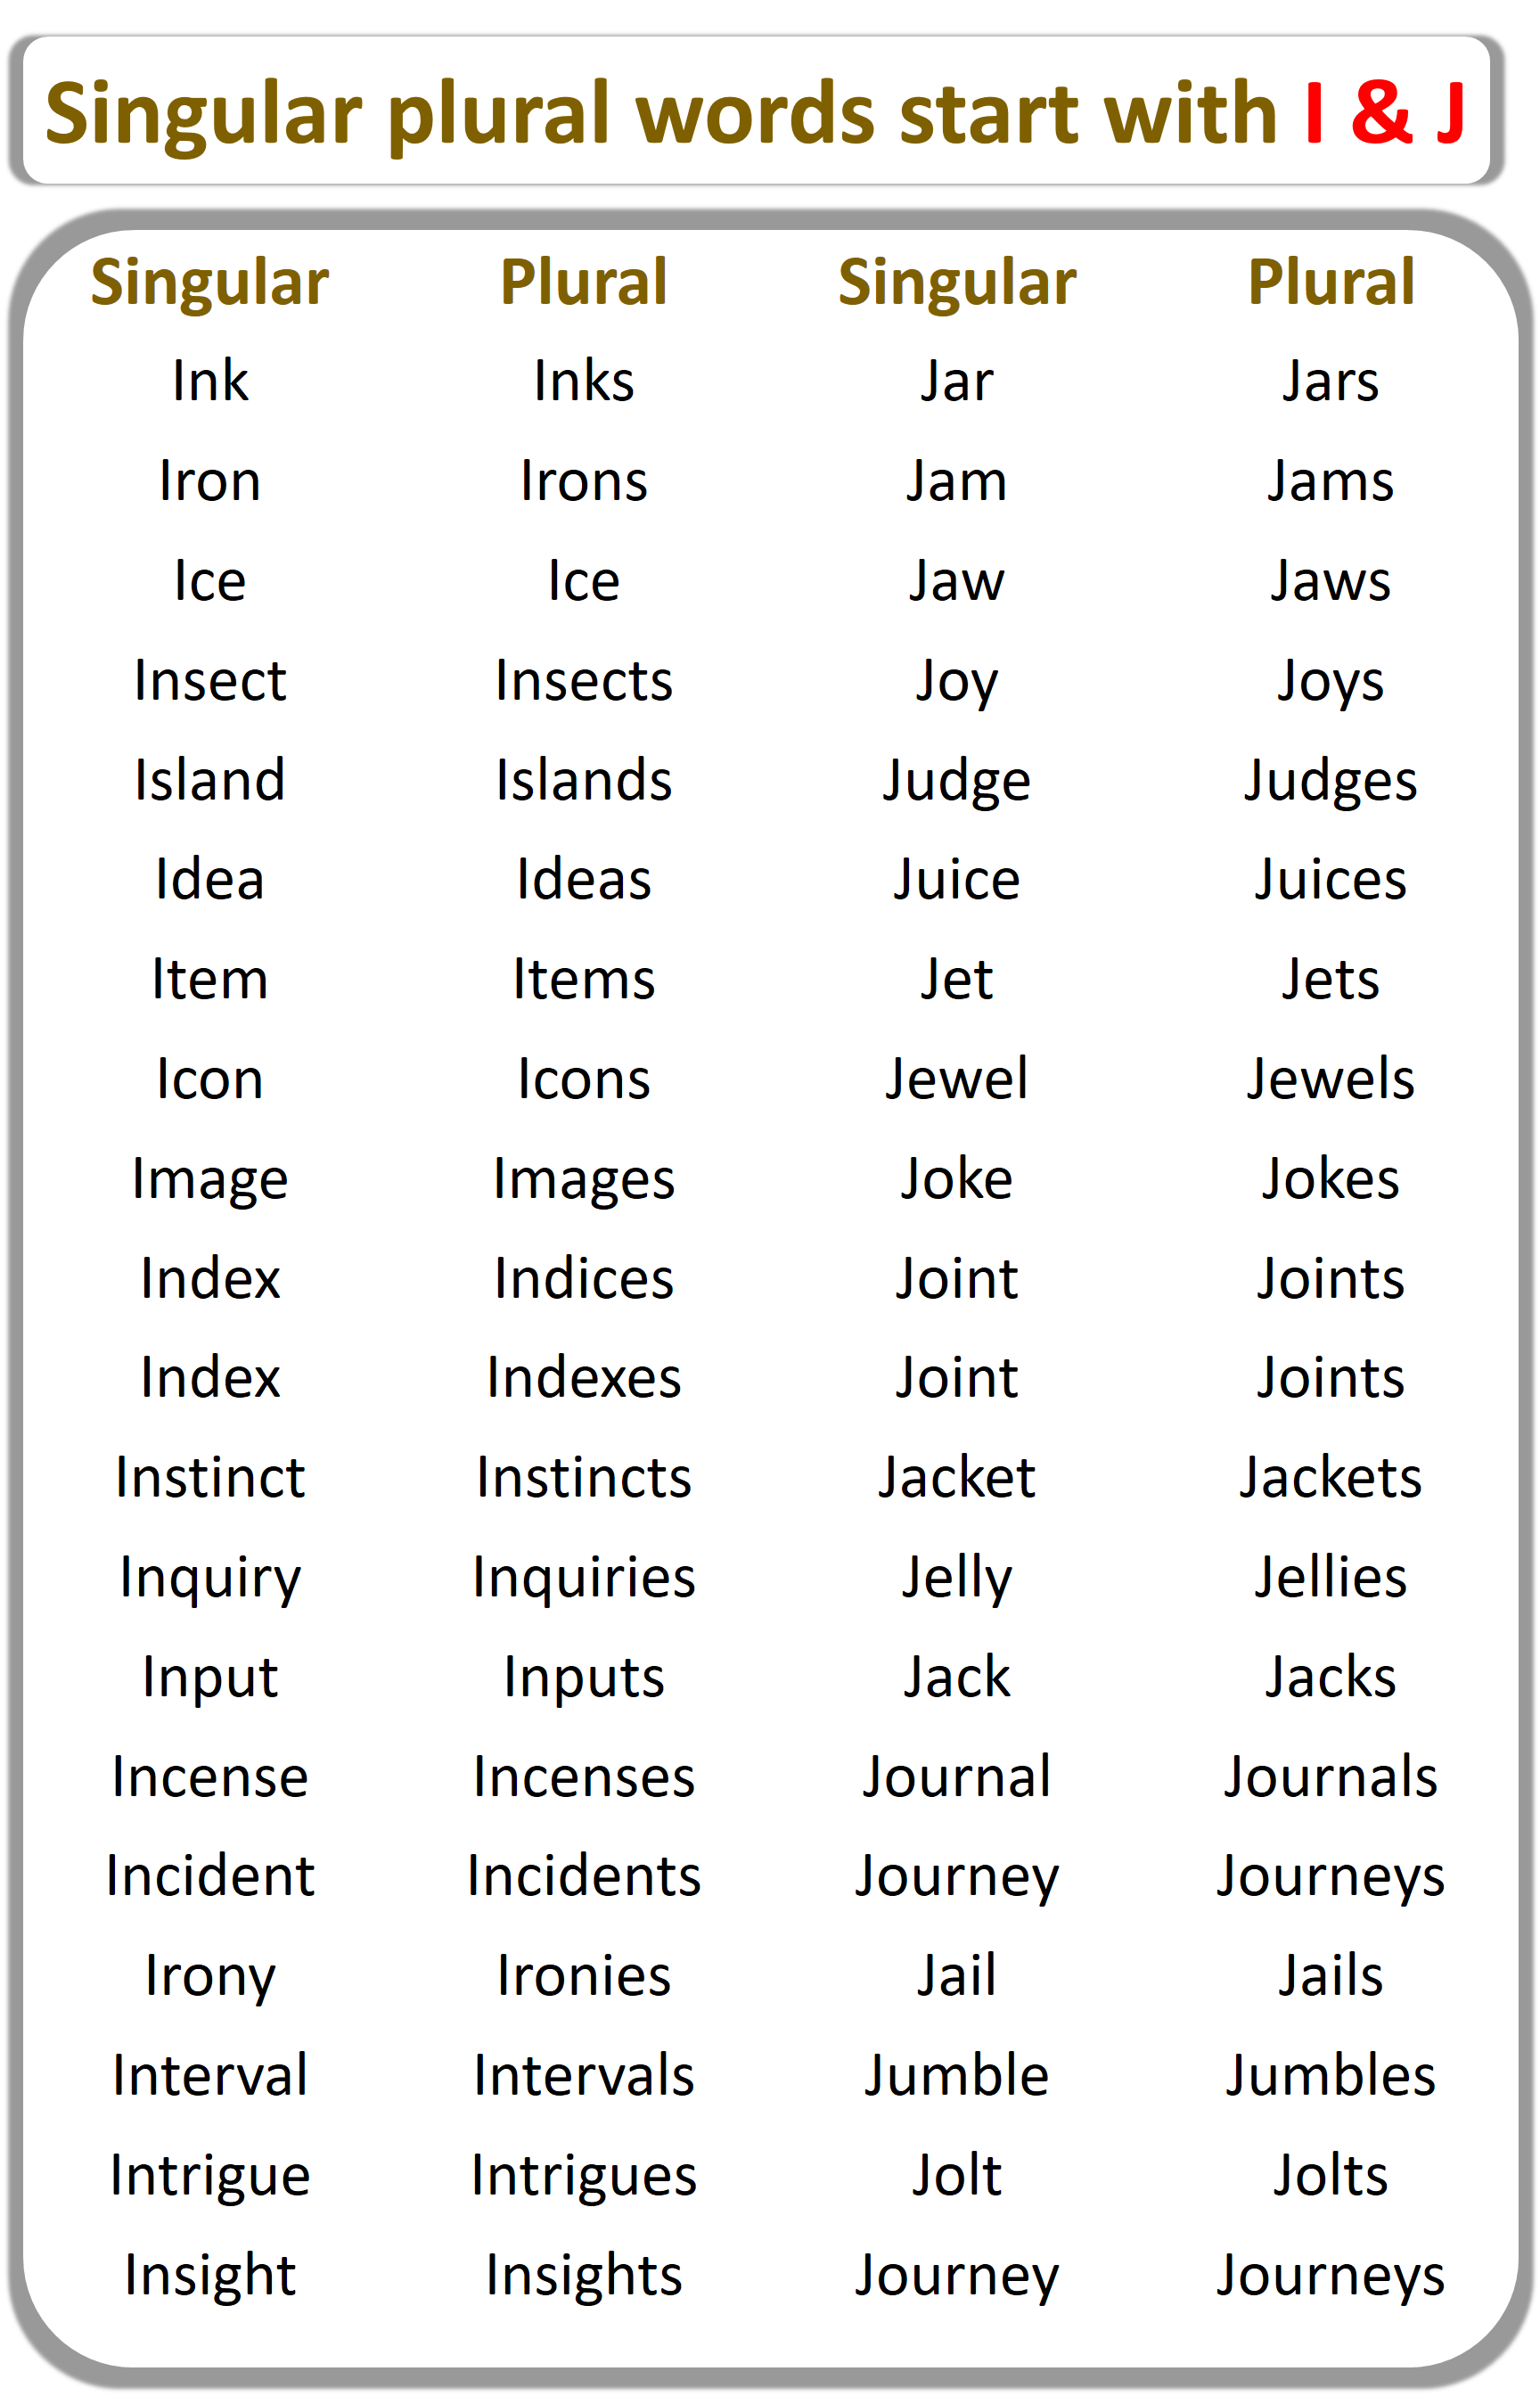 Singular Plural Words List From A to Z | I & J